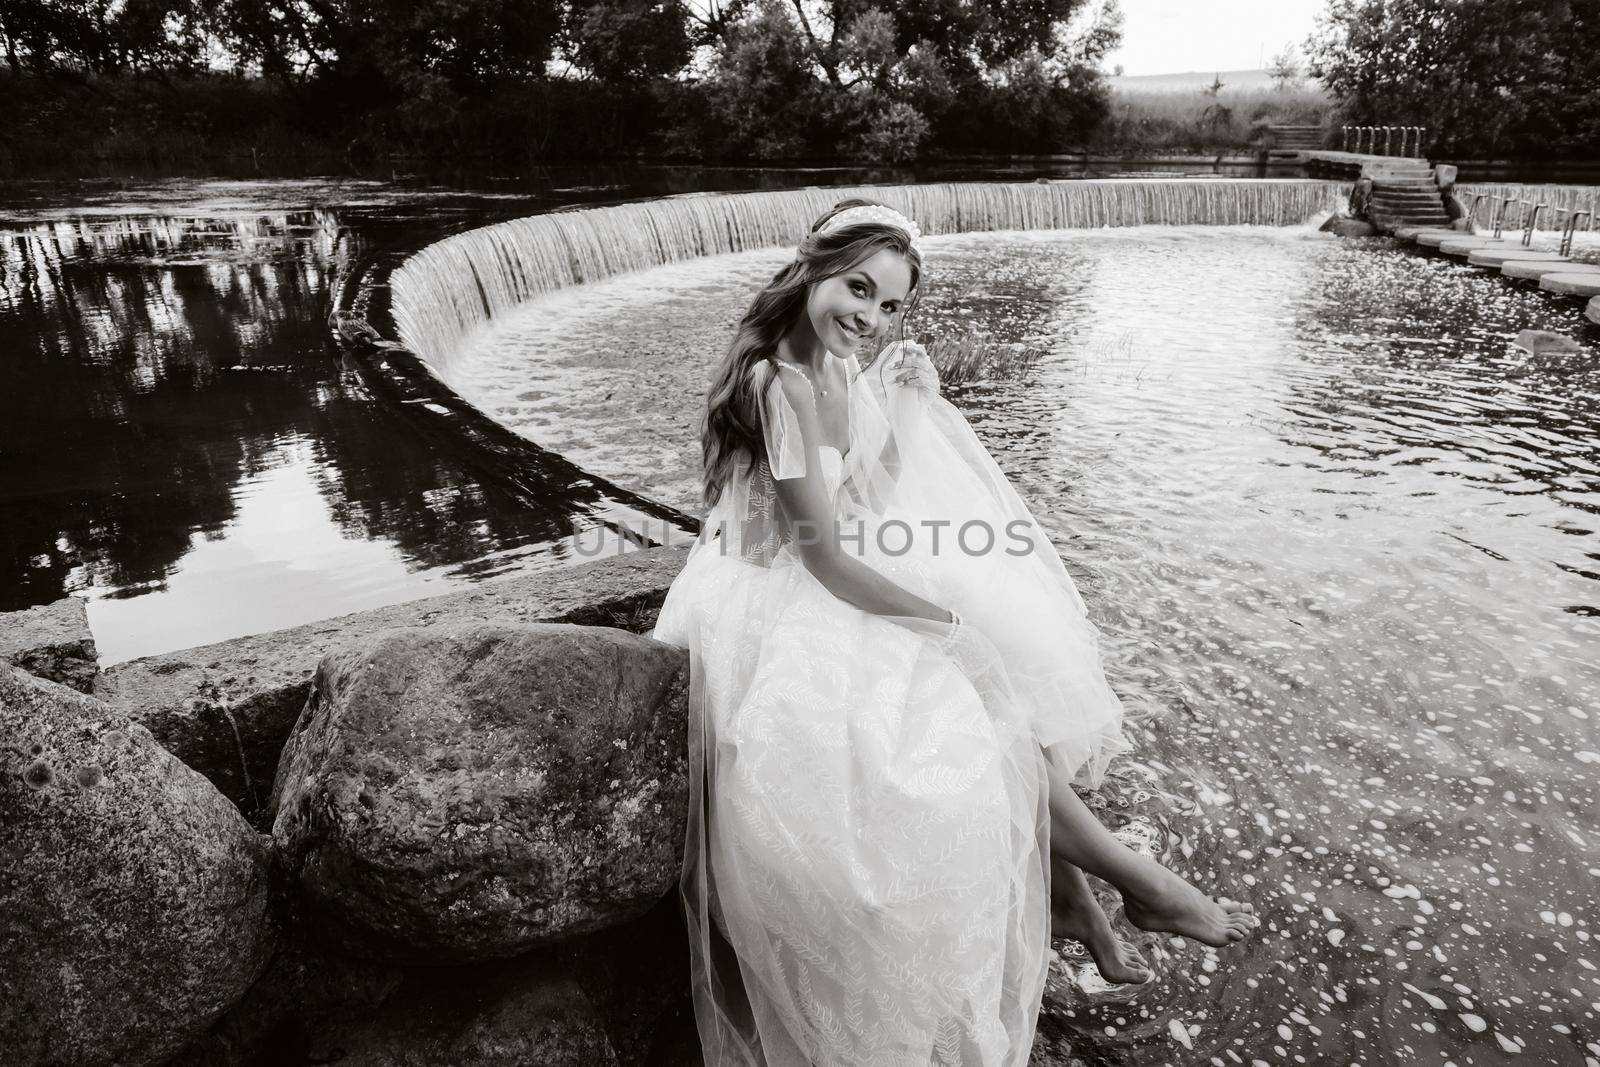 An elegant bride in a white dress, gloves and bare feet is sitting near a waterfall in the Park enjoying nature.A model in a wedding dress and gloves at a nature Park.Belarus by Lobachad